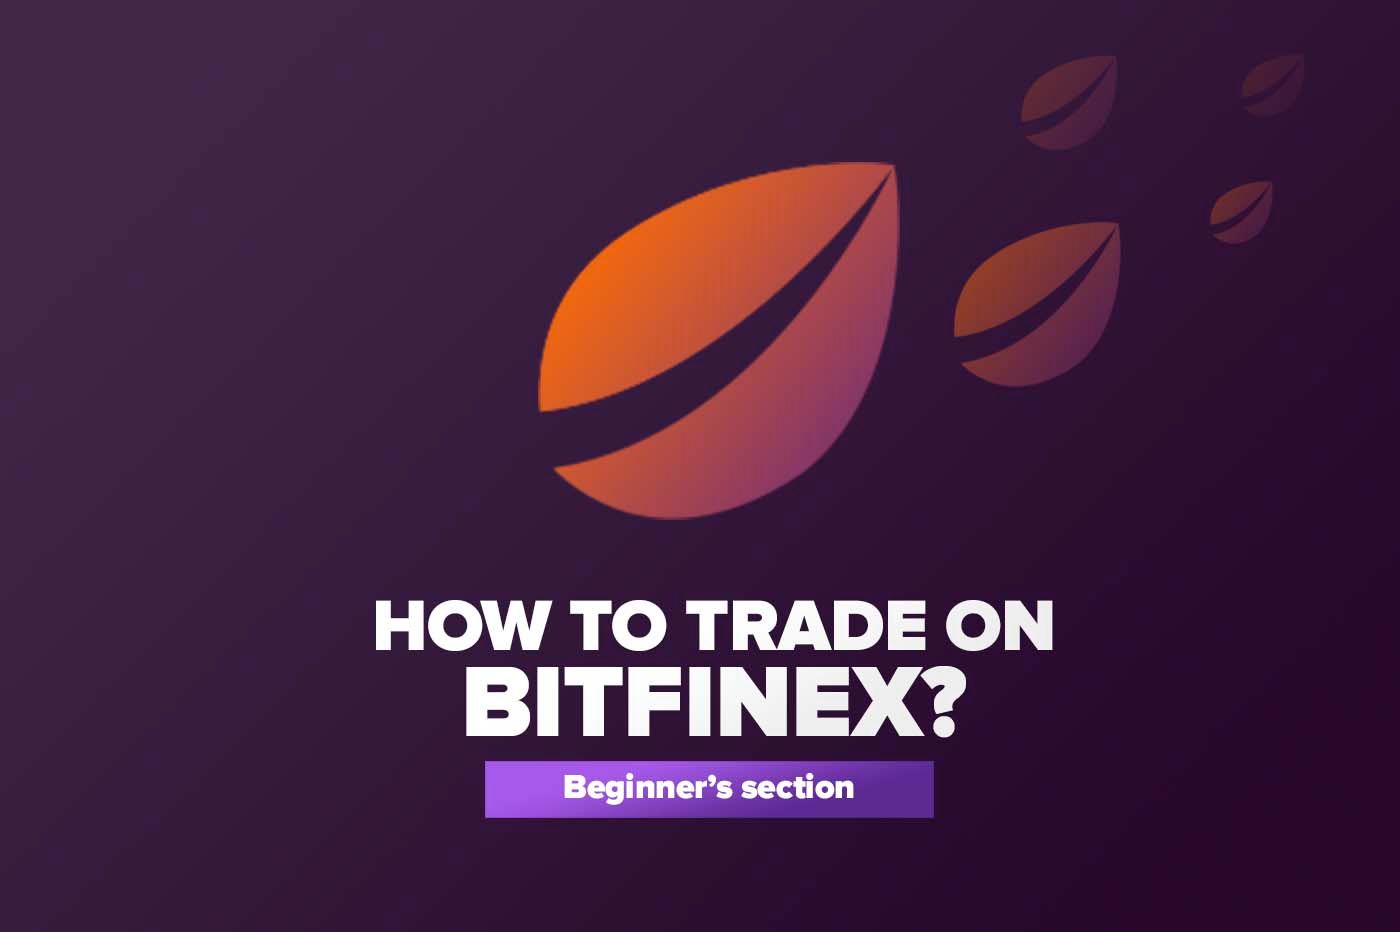 Article How to trade on Bitfinex